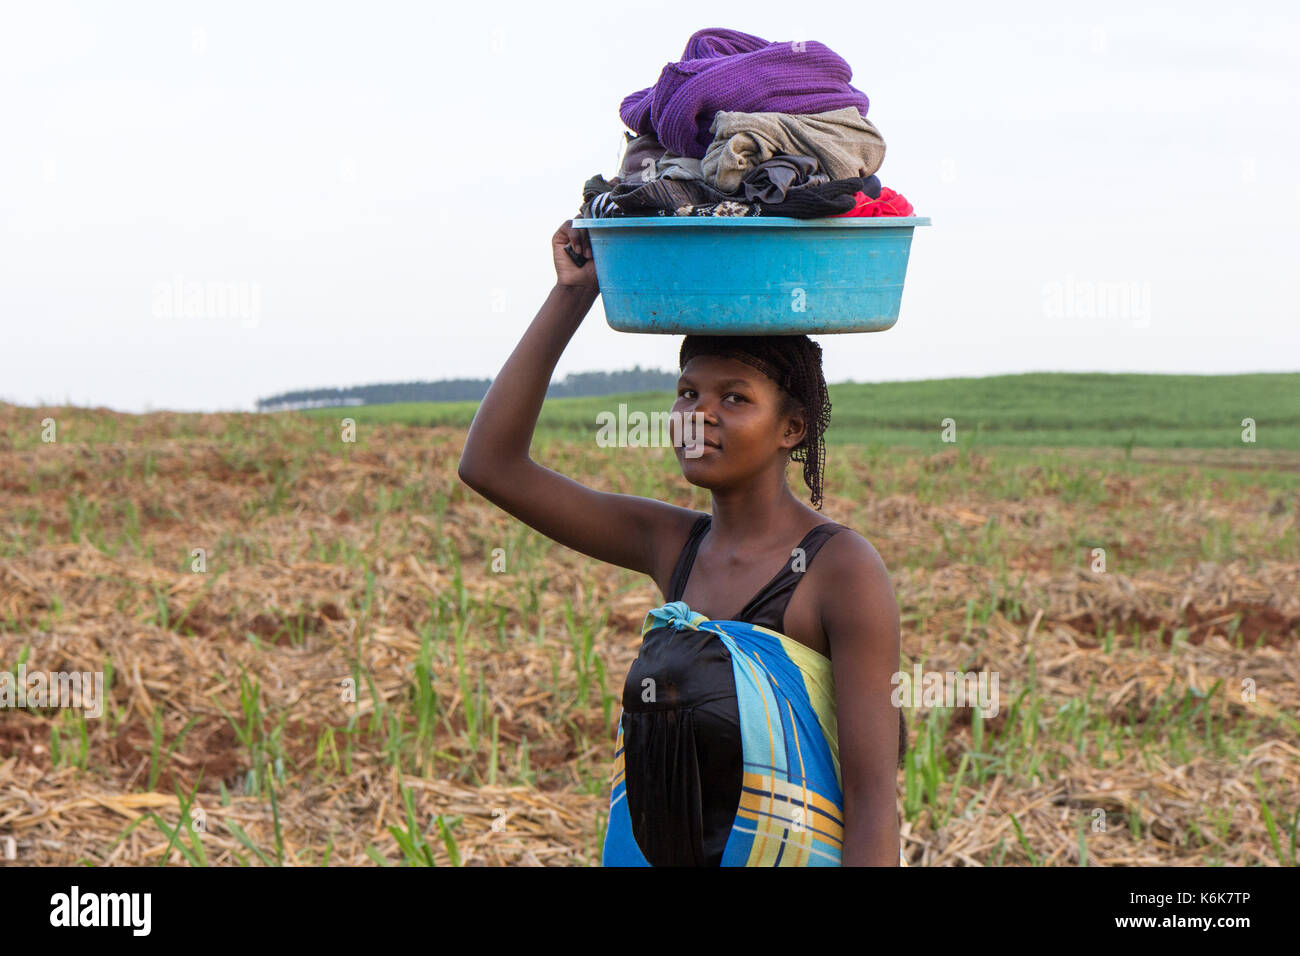 A young African woman carrying a wash basin full of laundry on her head through a field. Stock Photo